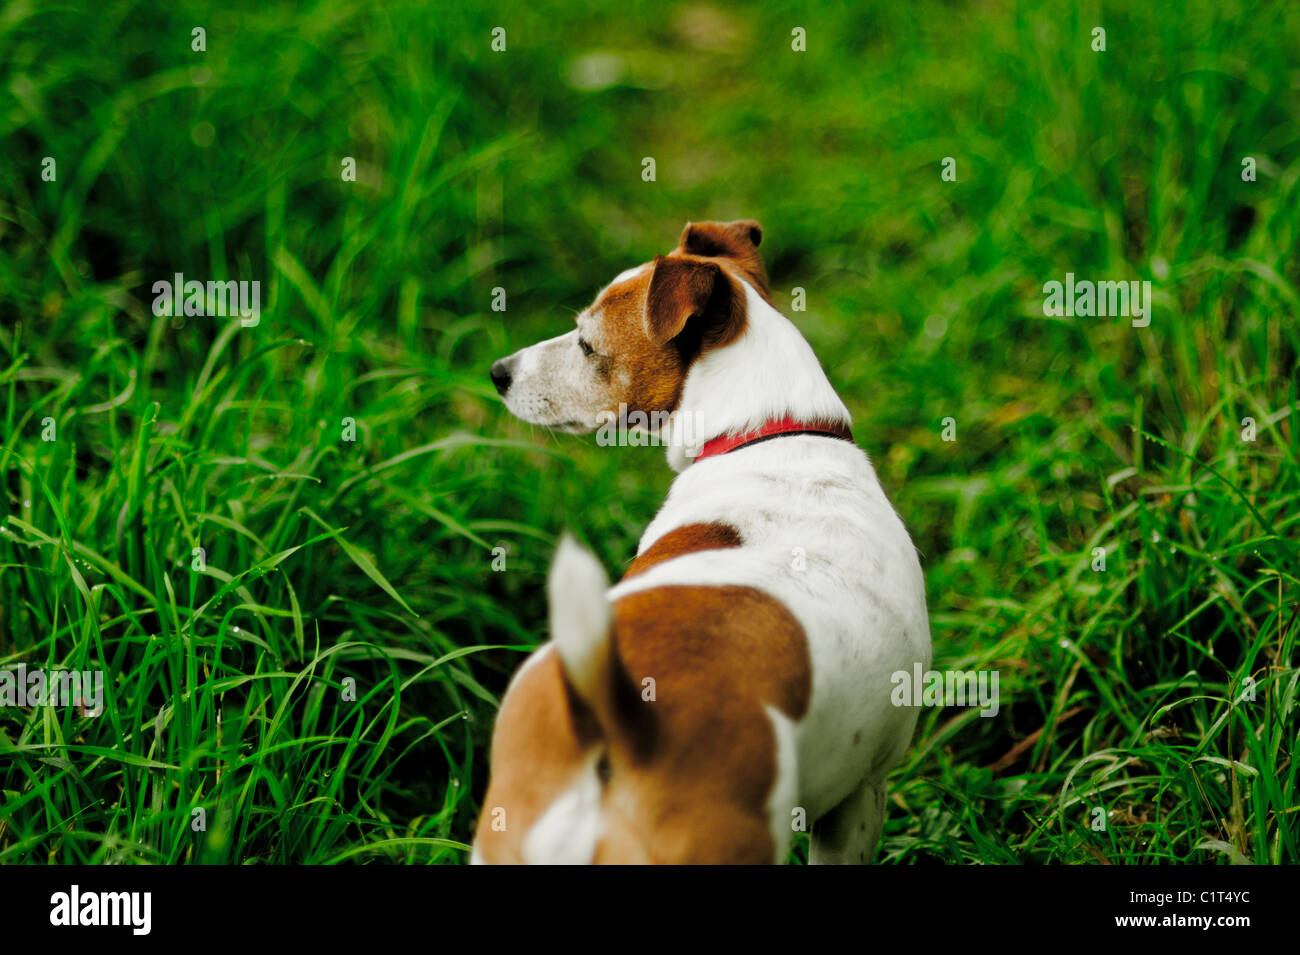 A rear view of a Jack Russell dog Stock Photo